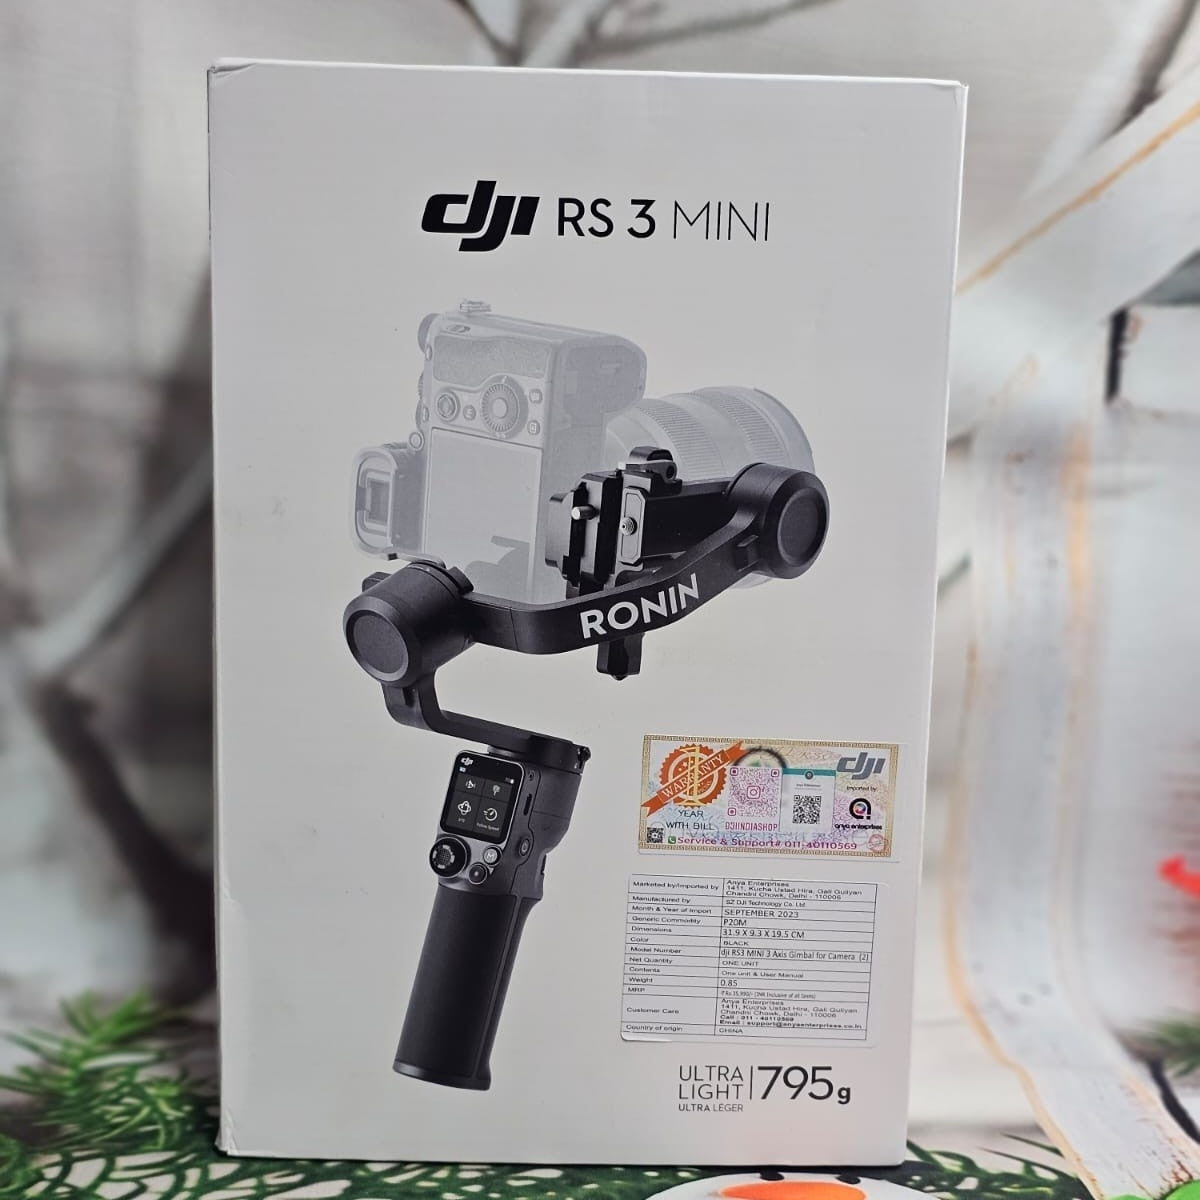 DJI RS3 Mini, 3-Axis Mirrorless Gimbal Lightweight Stabilizer for  Canon/Sony/Panasonic/Nikon/Fujifilm, 2 kg (4.4 lbs) Tested Payload,  Bluetooth Sutter